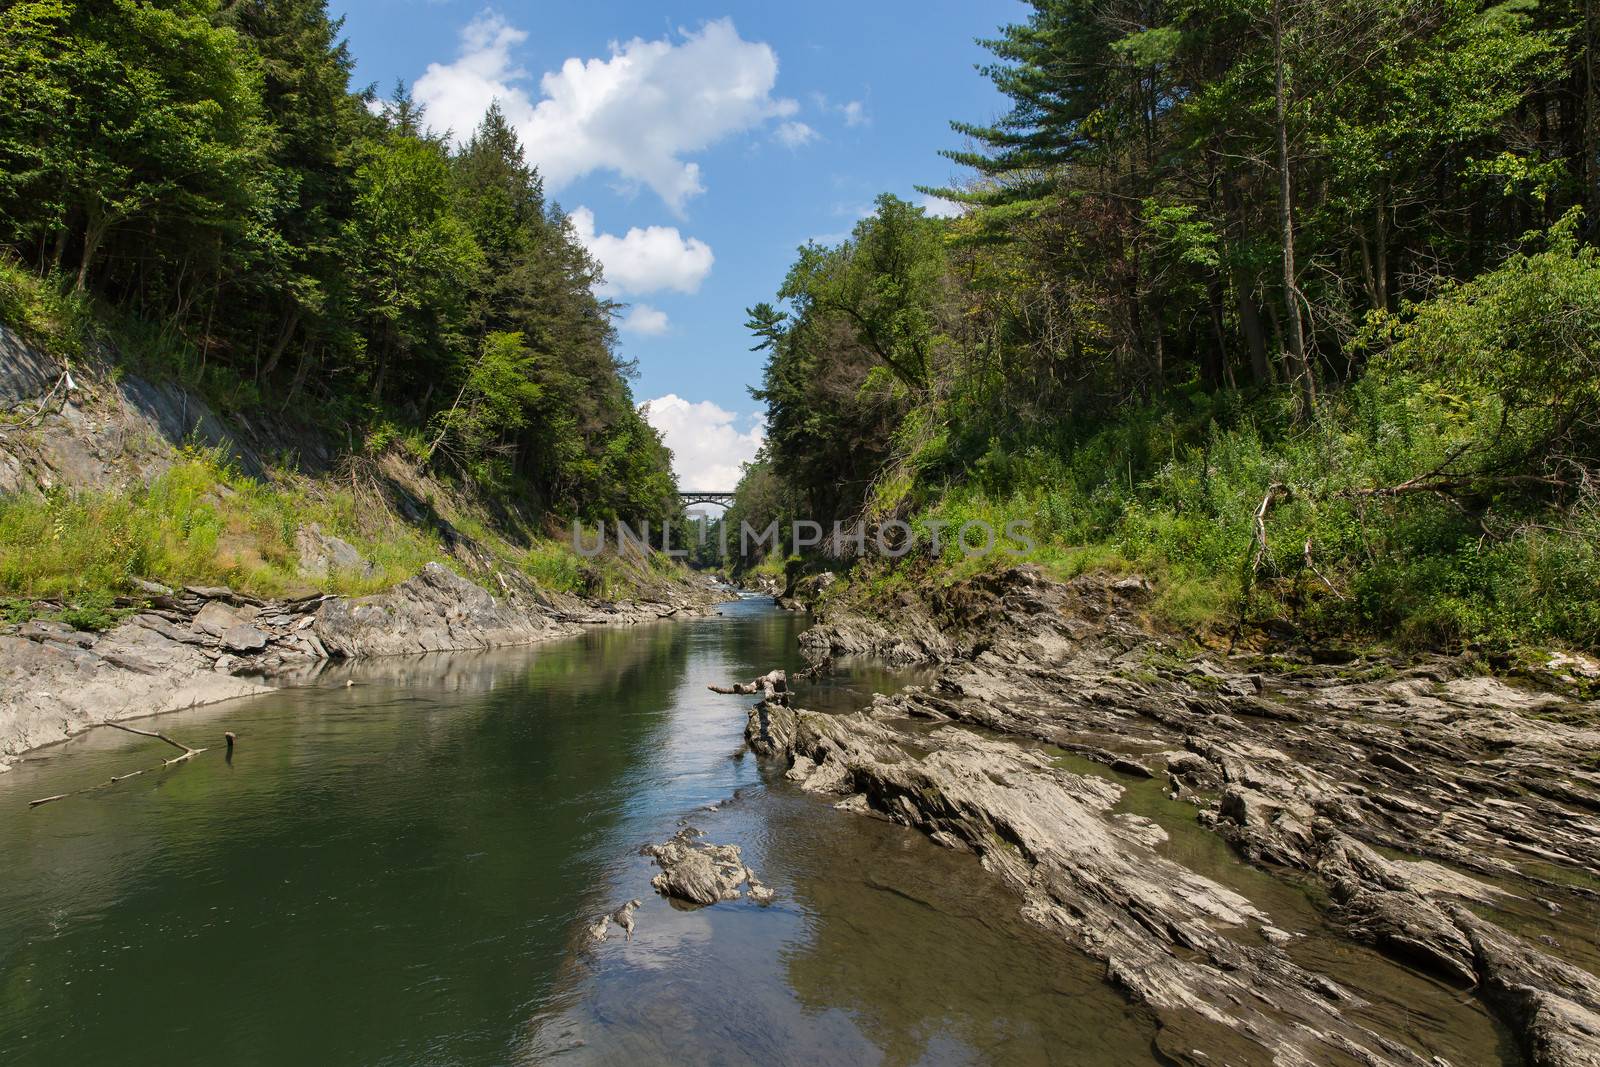 This is a view of the Ottauquechee River flowing through the Quechee Gorge State Park.